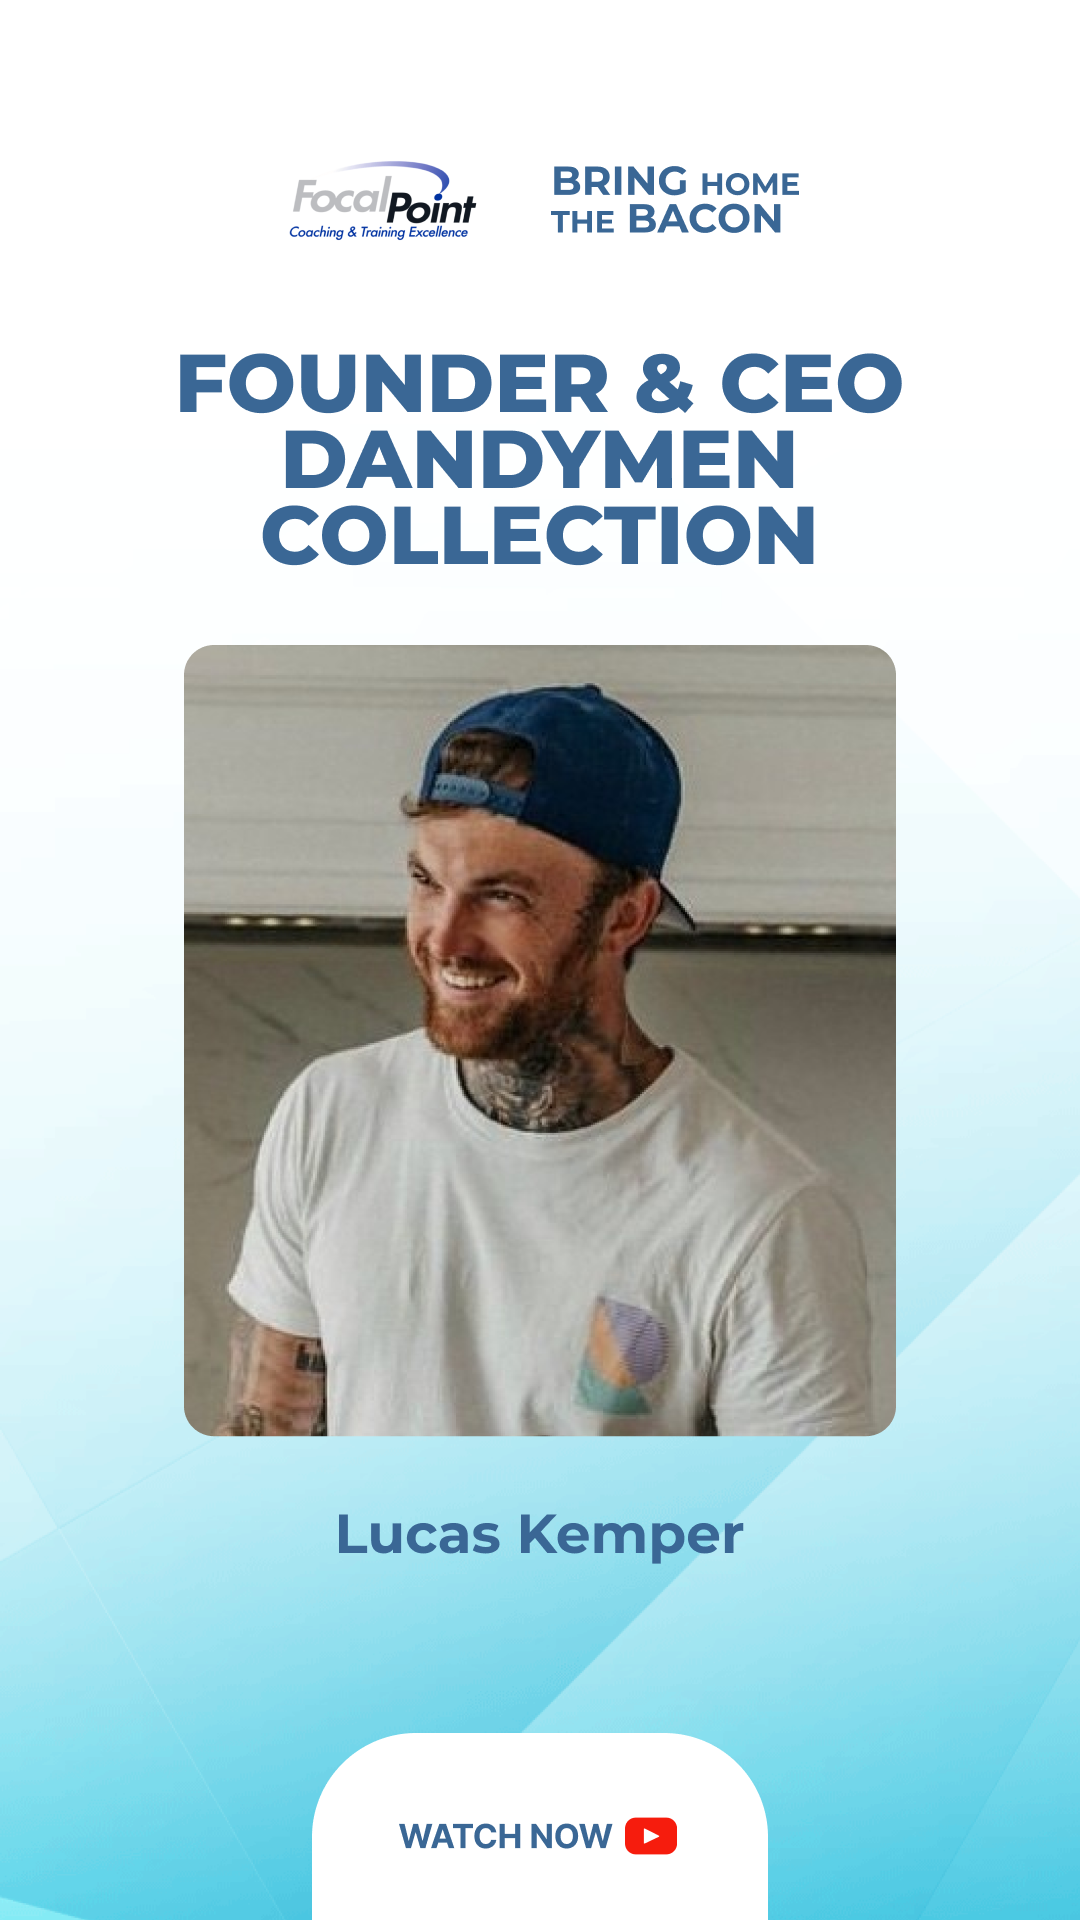 The Dandymen Collection